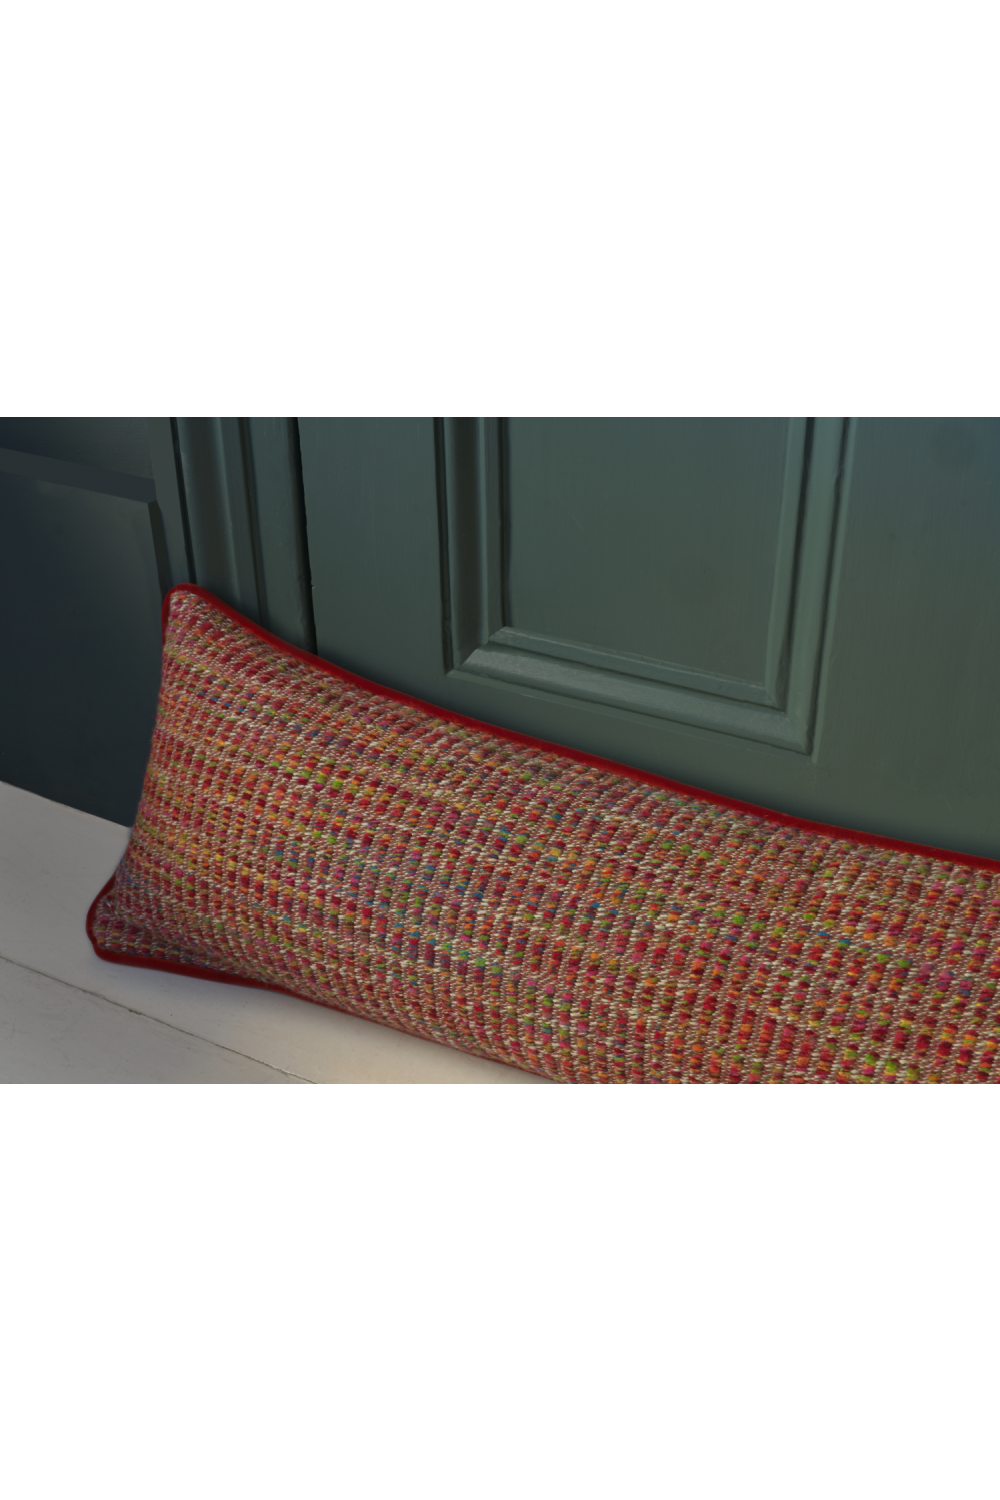 Red Draught Excluder | Andrew Martin Sorrento | Oroa.com